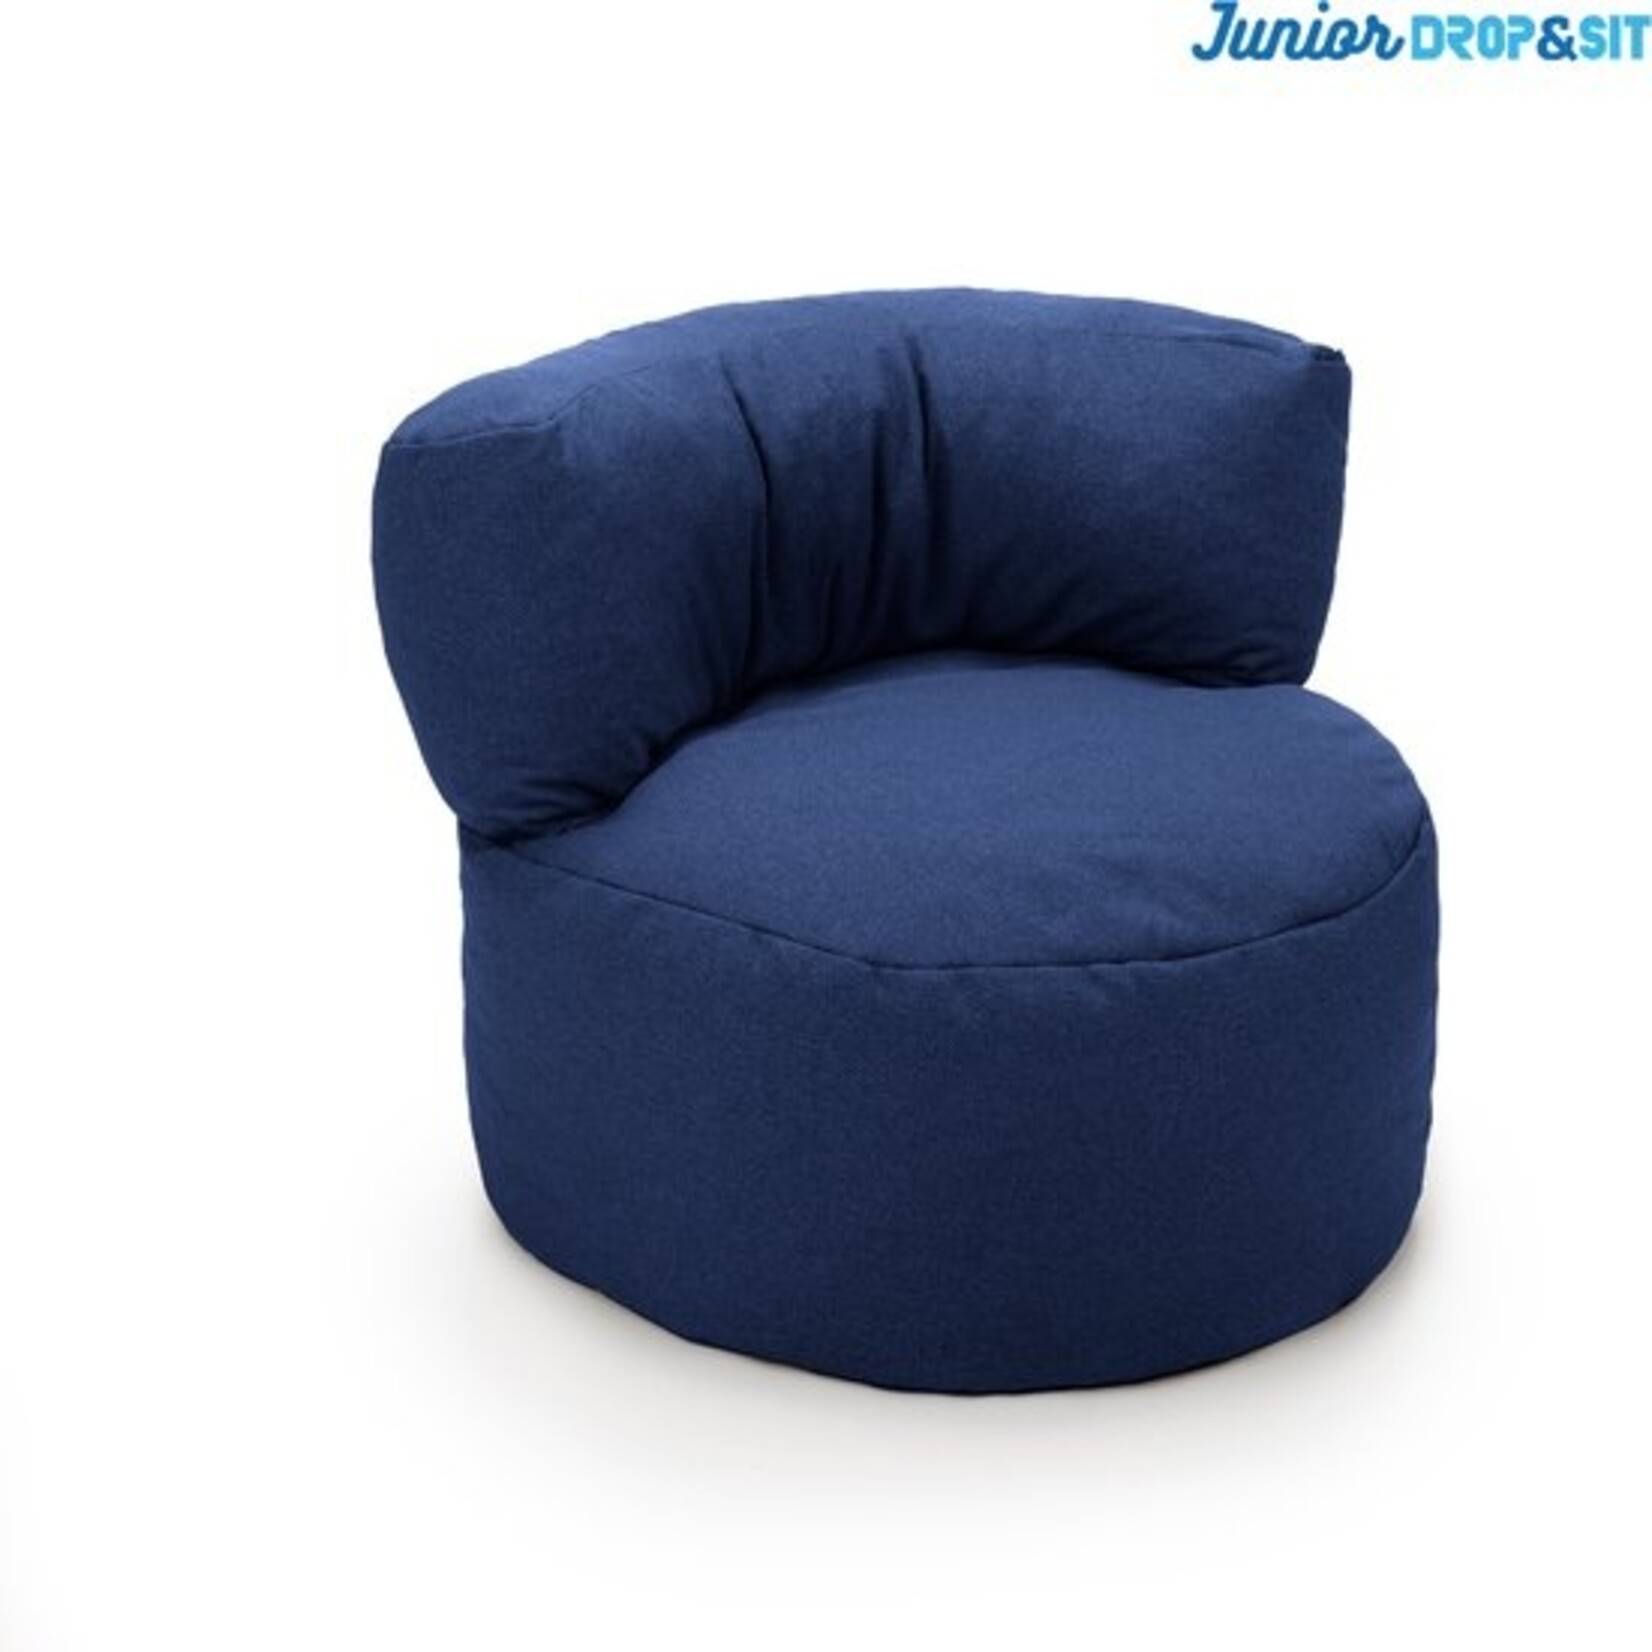 Drop & Sit - Beanbag Chair Junior - Dark Blue - 70 x 50 cm - High chair with filling for indoor use